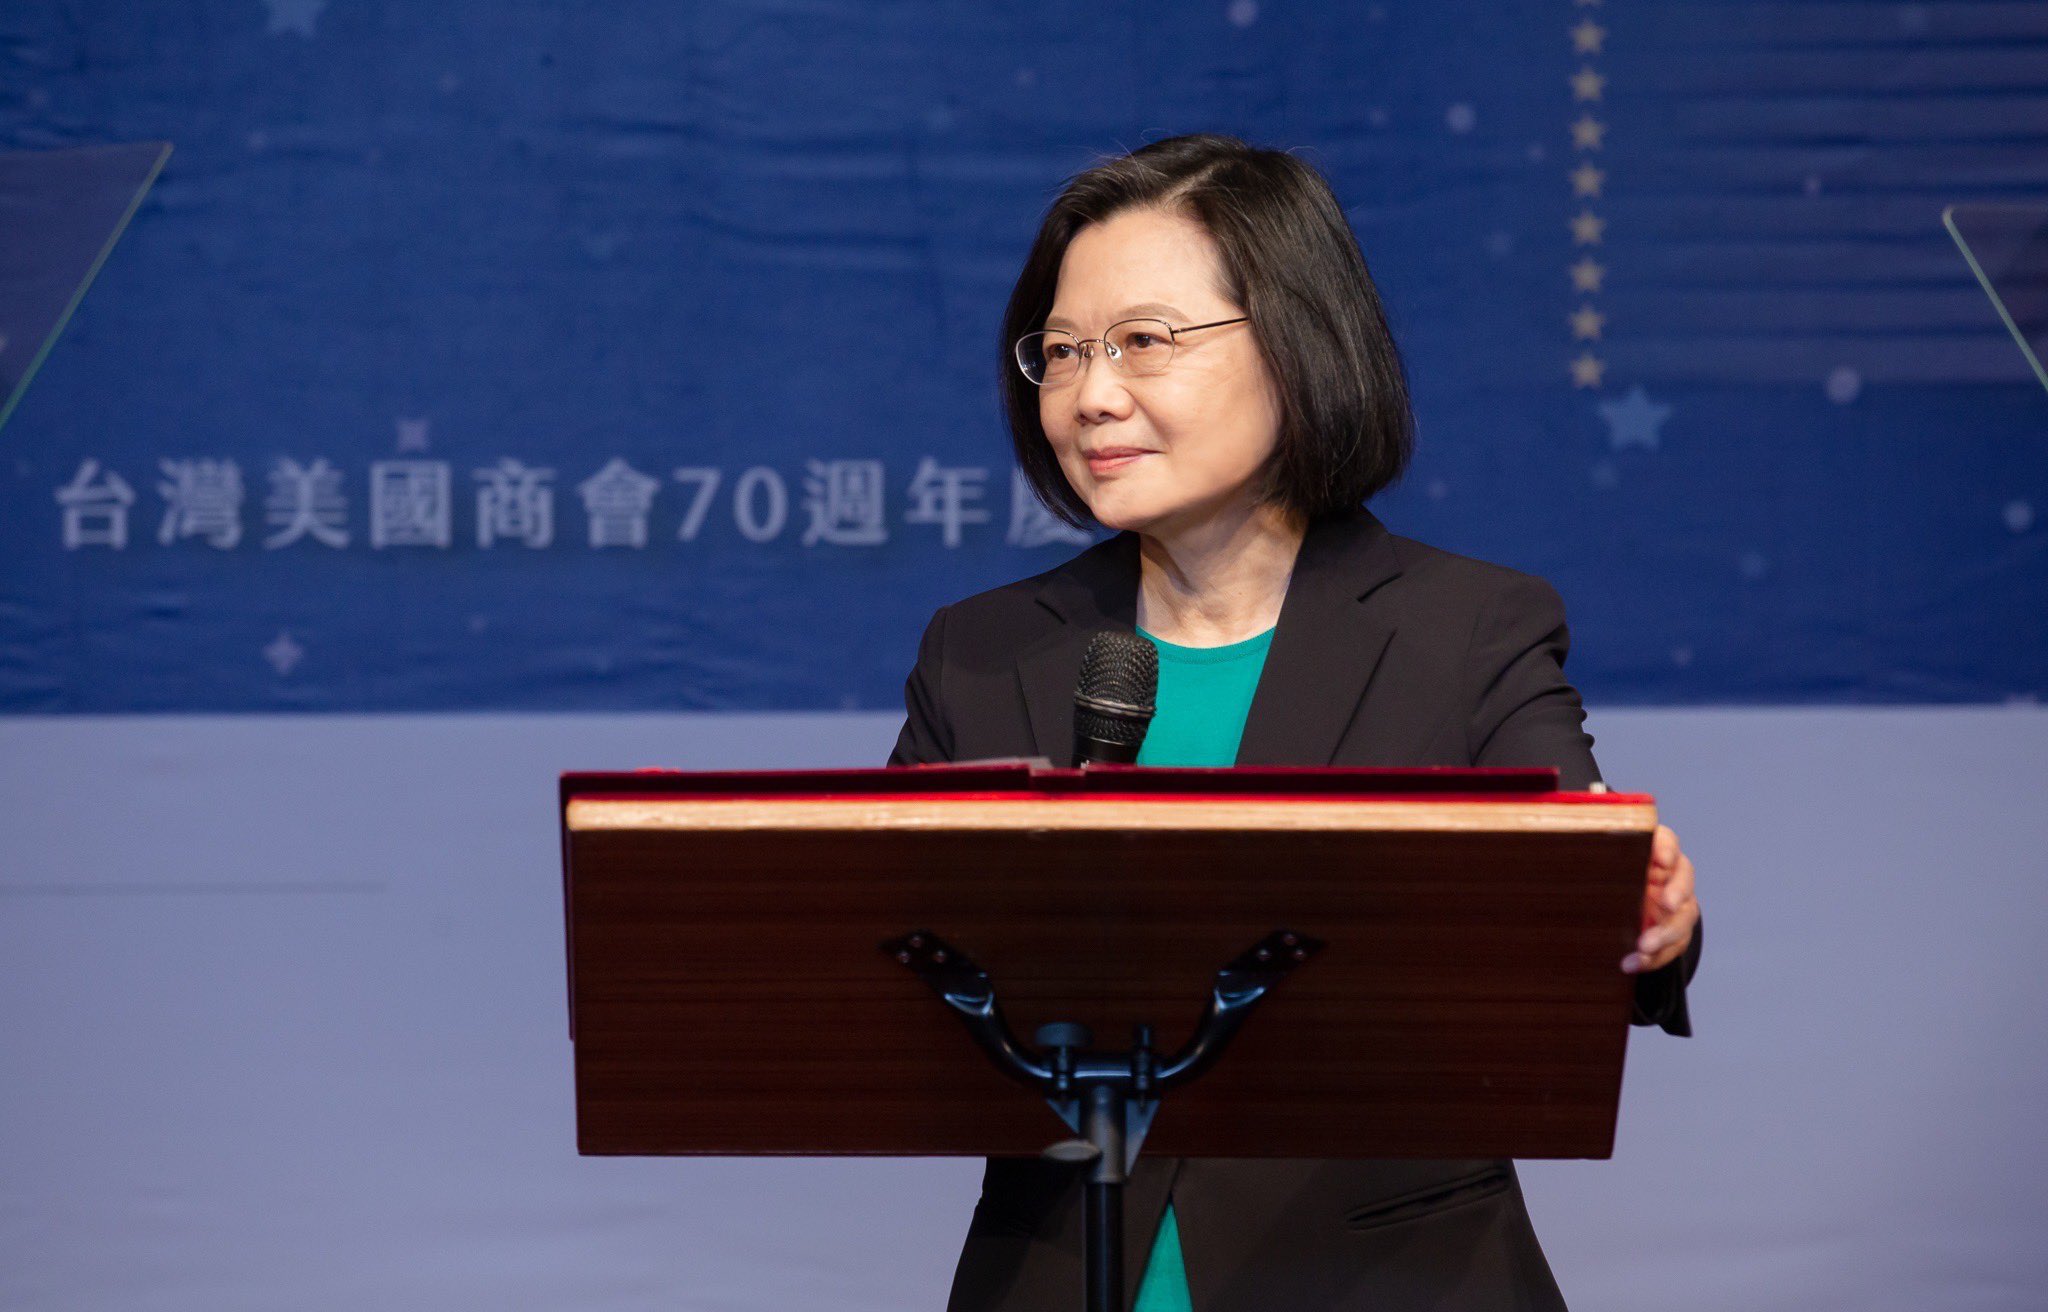 The threat to Taiwan's president: "If you were Catalan, you'd be in prison now"